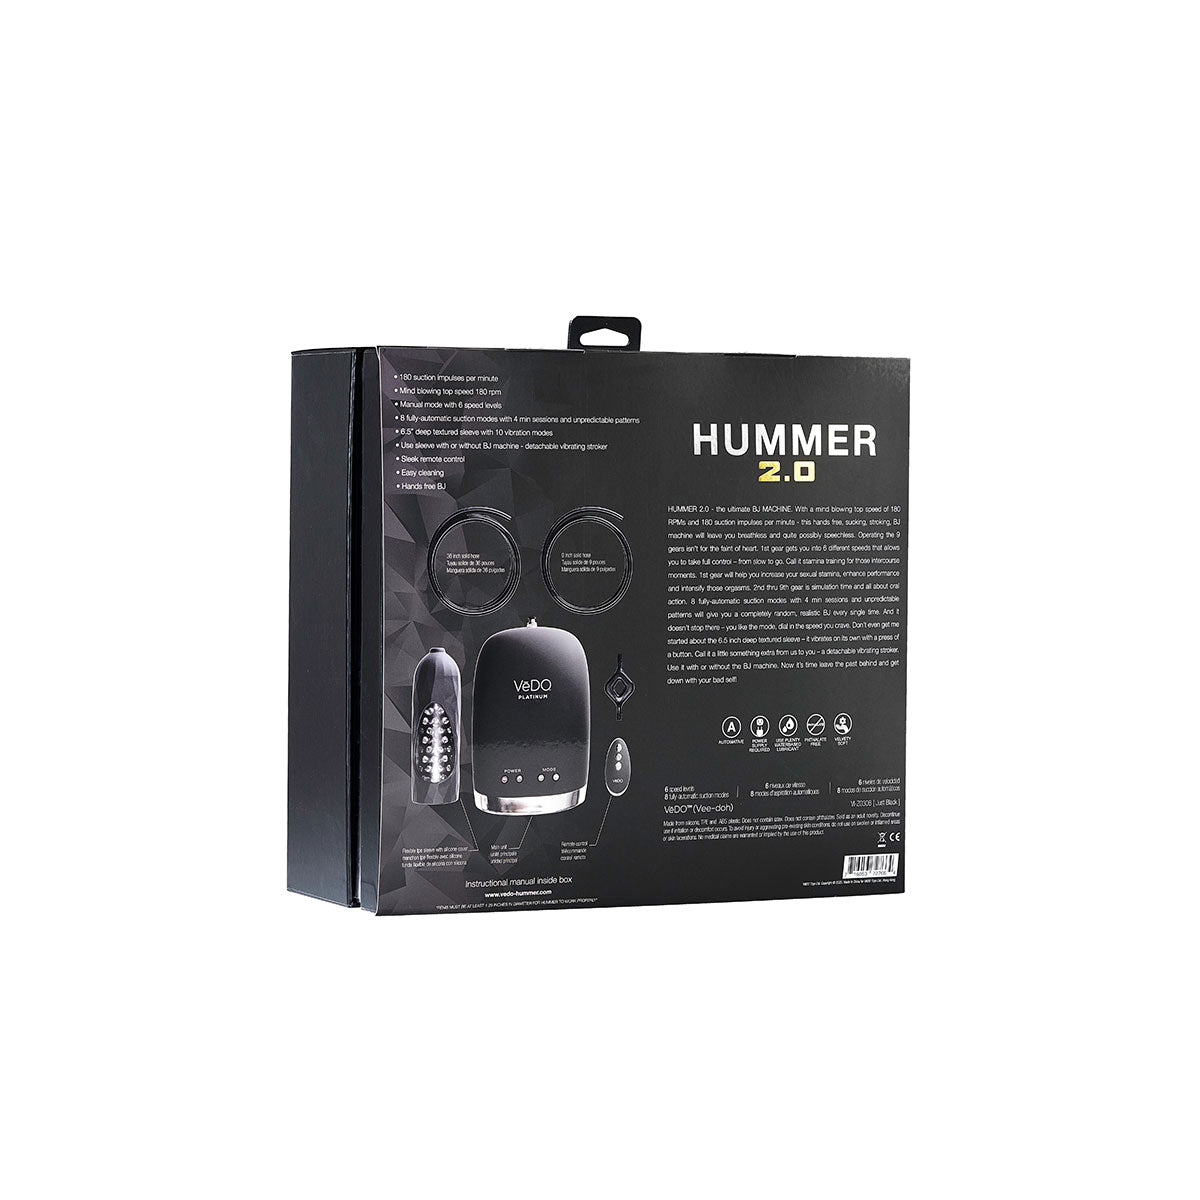 VeDO Hummer 2.0  The Ultimate BJ Machine Intimates Adult Boutique